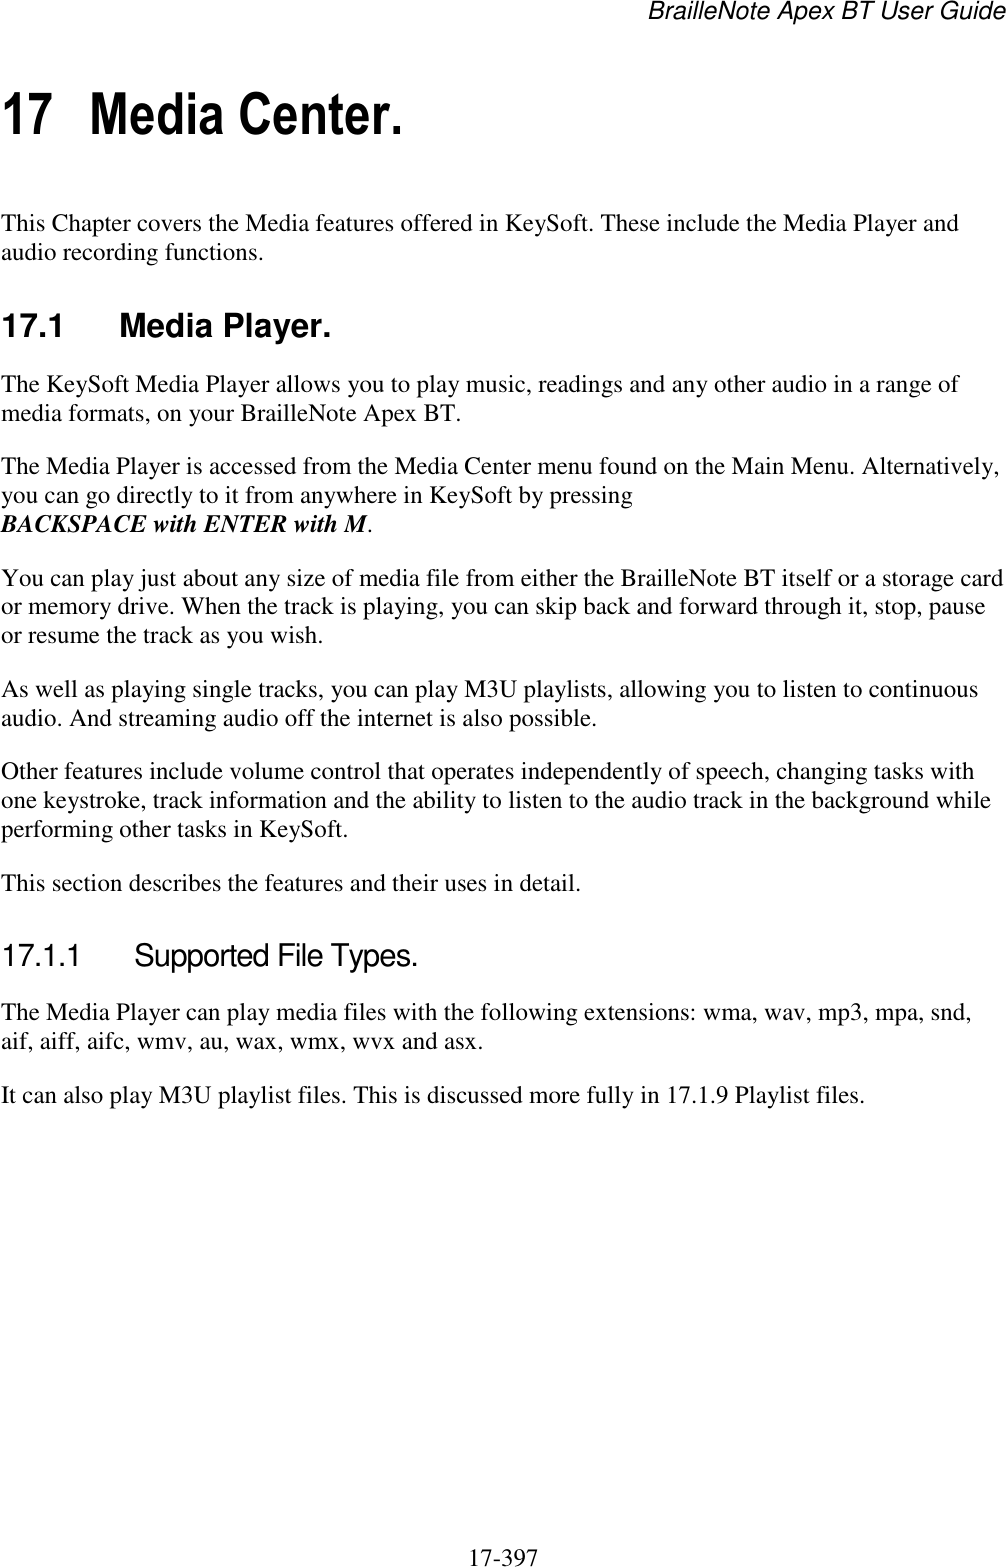 BrailleNote Apex BT User Guide   17-397   17 Media Center. This Chapter covers the Media features offered in KeySoft. These include the Media Player and audio recording functions.  17.1  Media Player. The KeySoft Media Player allows you to play music, readings and any other audio in a range of media formats, on your BrailleNote Apex BT.  The Media Player is accessed from the Media Center menu found on the Main Menu. Alternatively, you can go directly to it from anywhere in KeySoft by pressing BACKSPACE with ENTER with M. You can play just about any size of media file from either the BrailleNote BT itself or a storage card or memory drive. When the track is playing, you can skip back and forward through it, stop, pause or resume the track as you wish. As well as playing single tracks, you can play M3U playlists, allowing you to listen to continuous audio. And streaming audio off the internet is also possible. Other features include volume control that operates independently of speech, changing tasks with one keystroke, track information and the ability to listen to the audio track in the background while performing other tasks in KeySoft. This section describes the features and their uses in detail.  17.1.1  Supported File Types. The Media Player can play media files with the following extensions: wma, wav, mp3, mpa, snd, aif, aiff, aifc, wmv, au, wax, wmx, wvx and asx. It can also play M3U playlist files. This is discussed more fully in 17.1.9 Playlist files.  